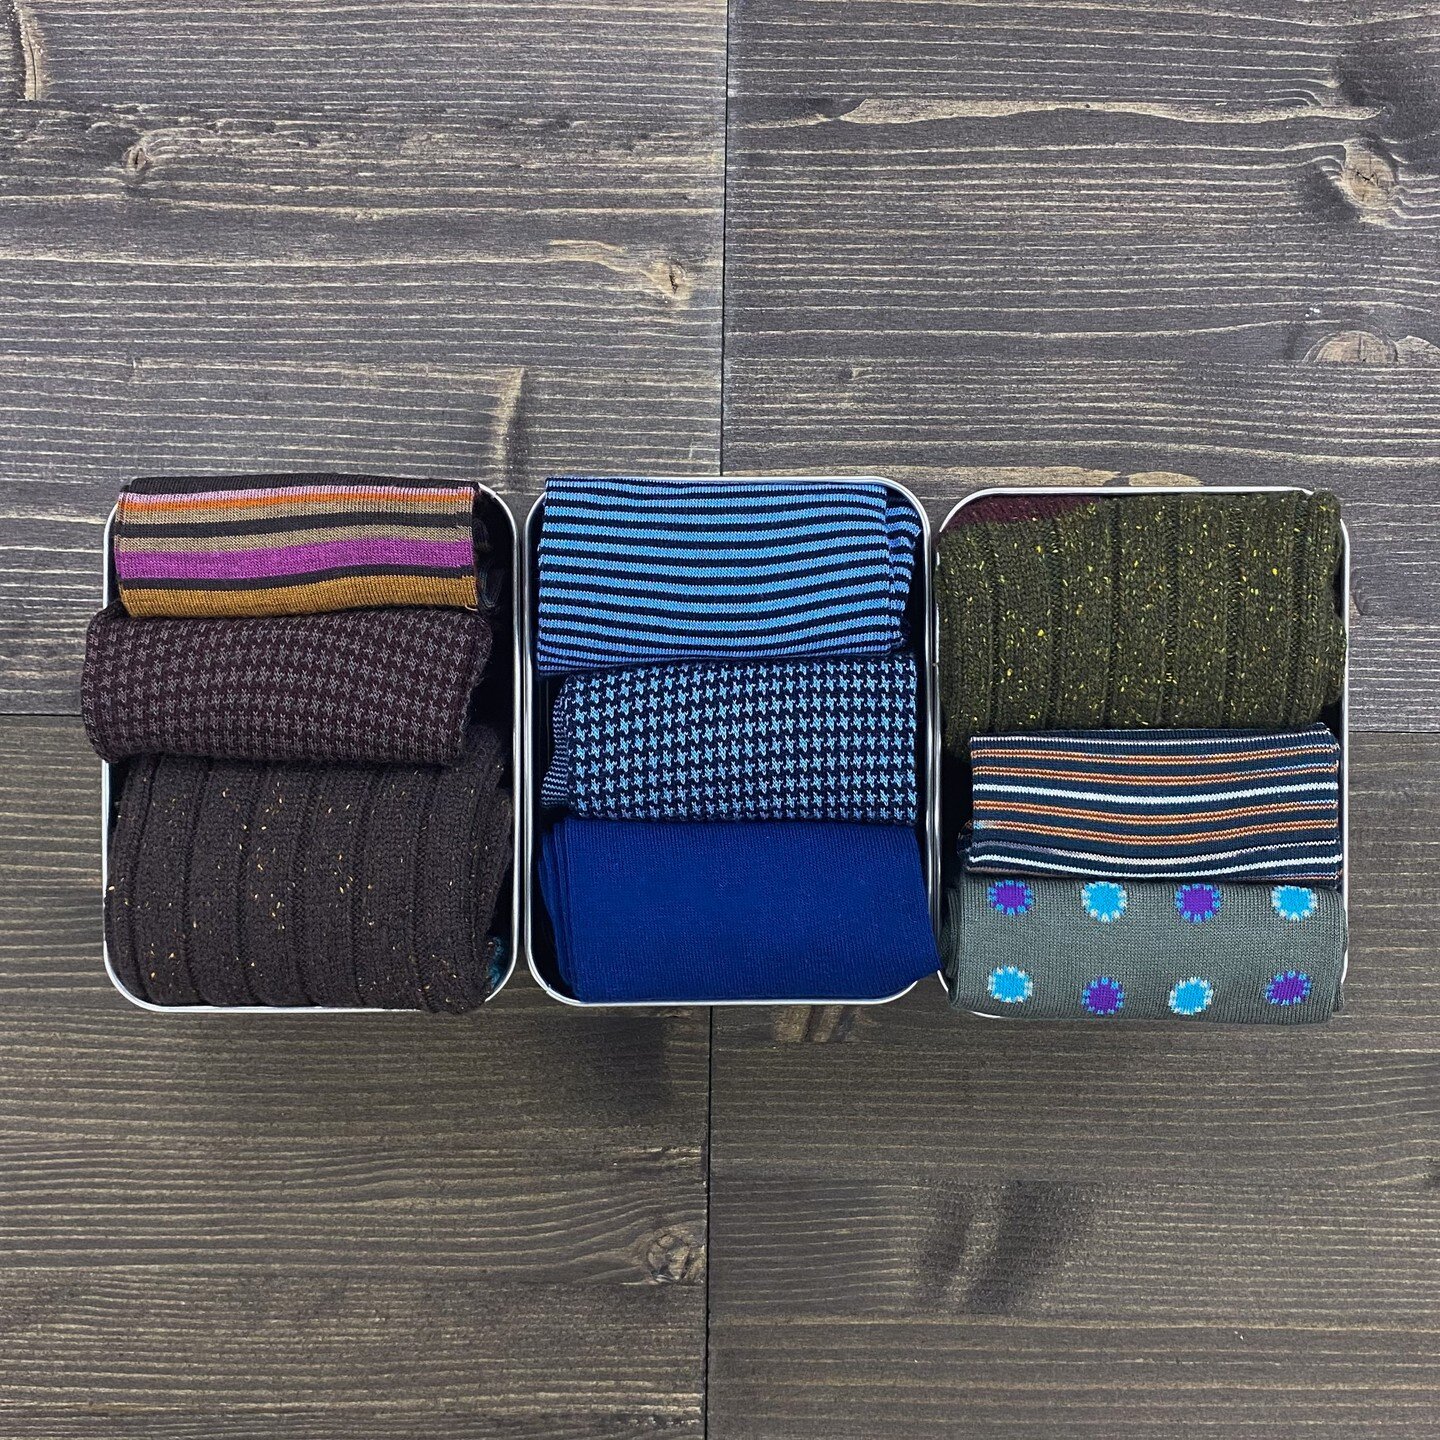 Our winter Pantherella Collection, made from the finest materials in Leicester, England

Now available on our website:
https://www.harrisonsmenswear.com.au/socks

#harrisonsmenswear #mensfashion #brisbane #winterfashion #menswear